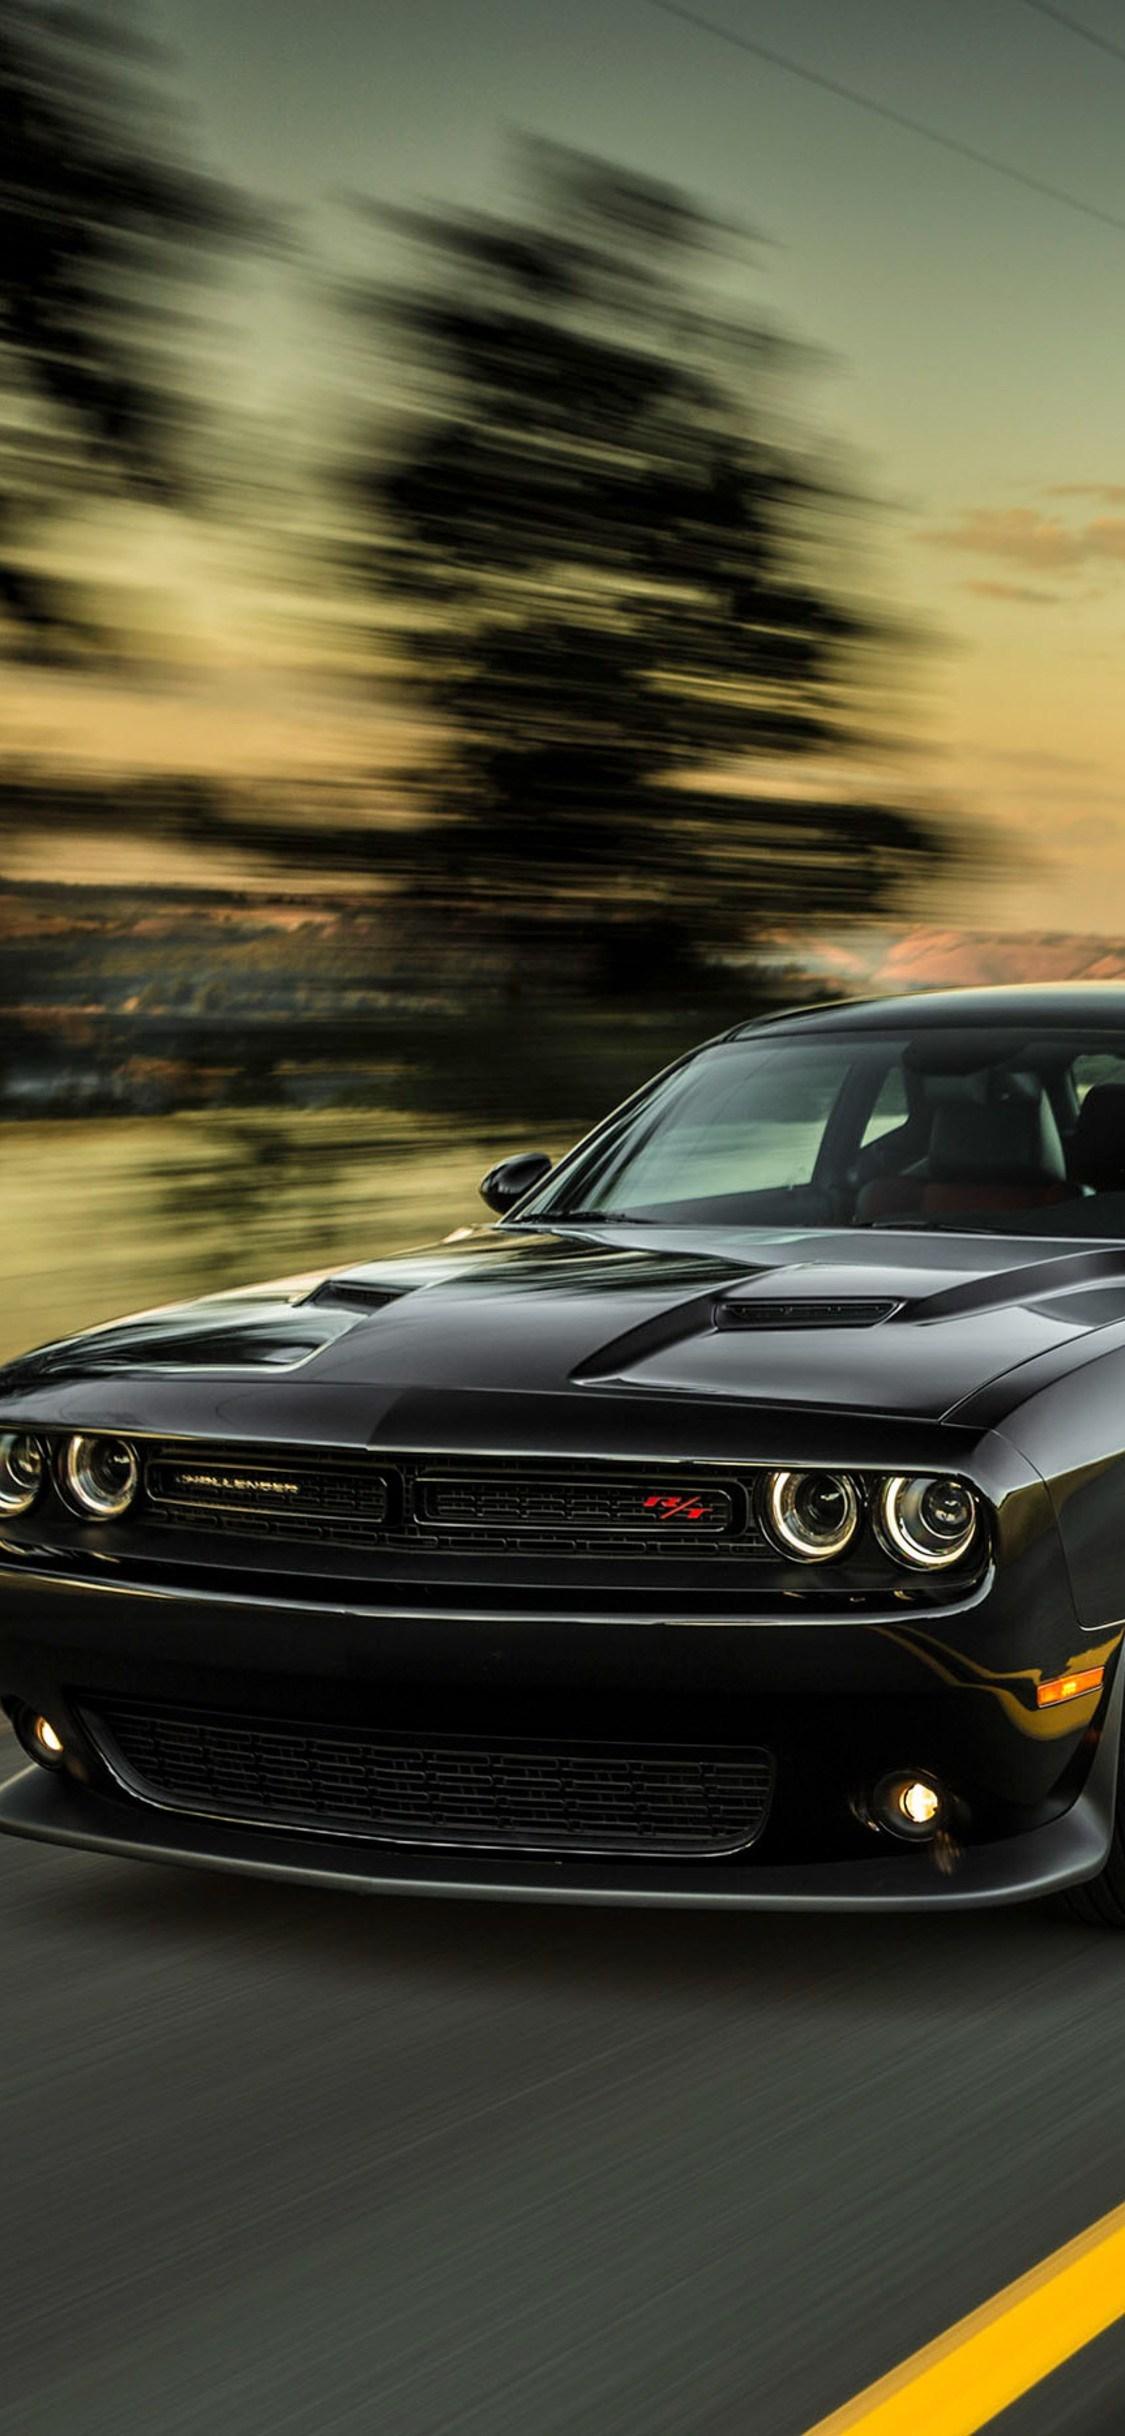 Dodge Challenger Wallpaper Cell Phone Free